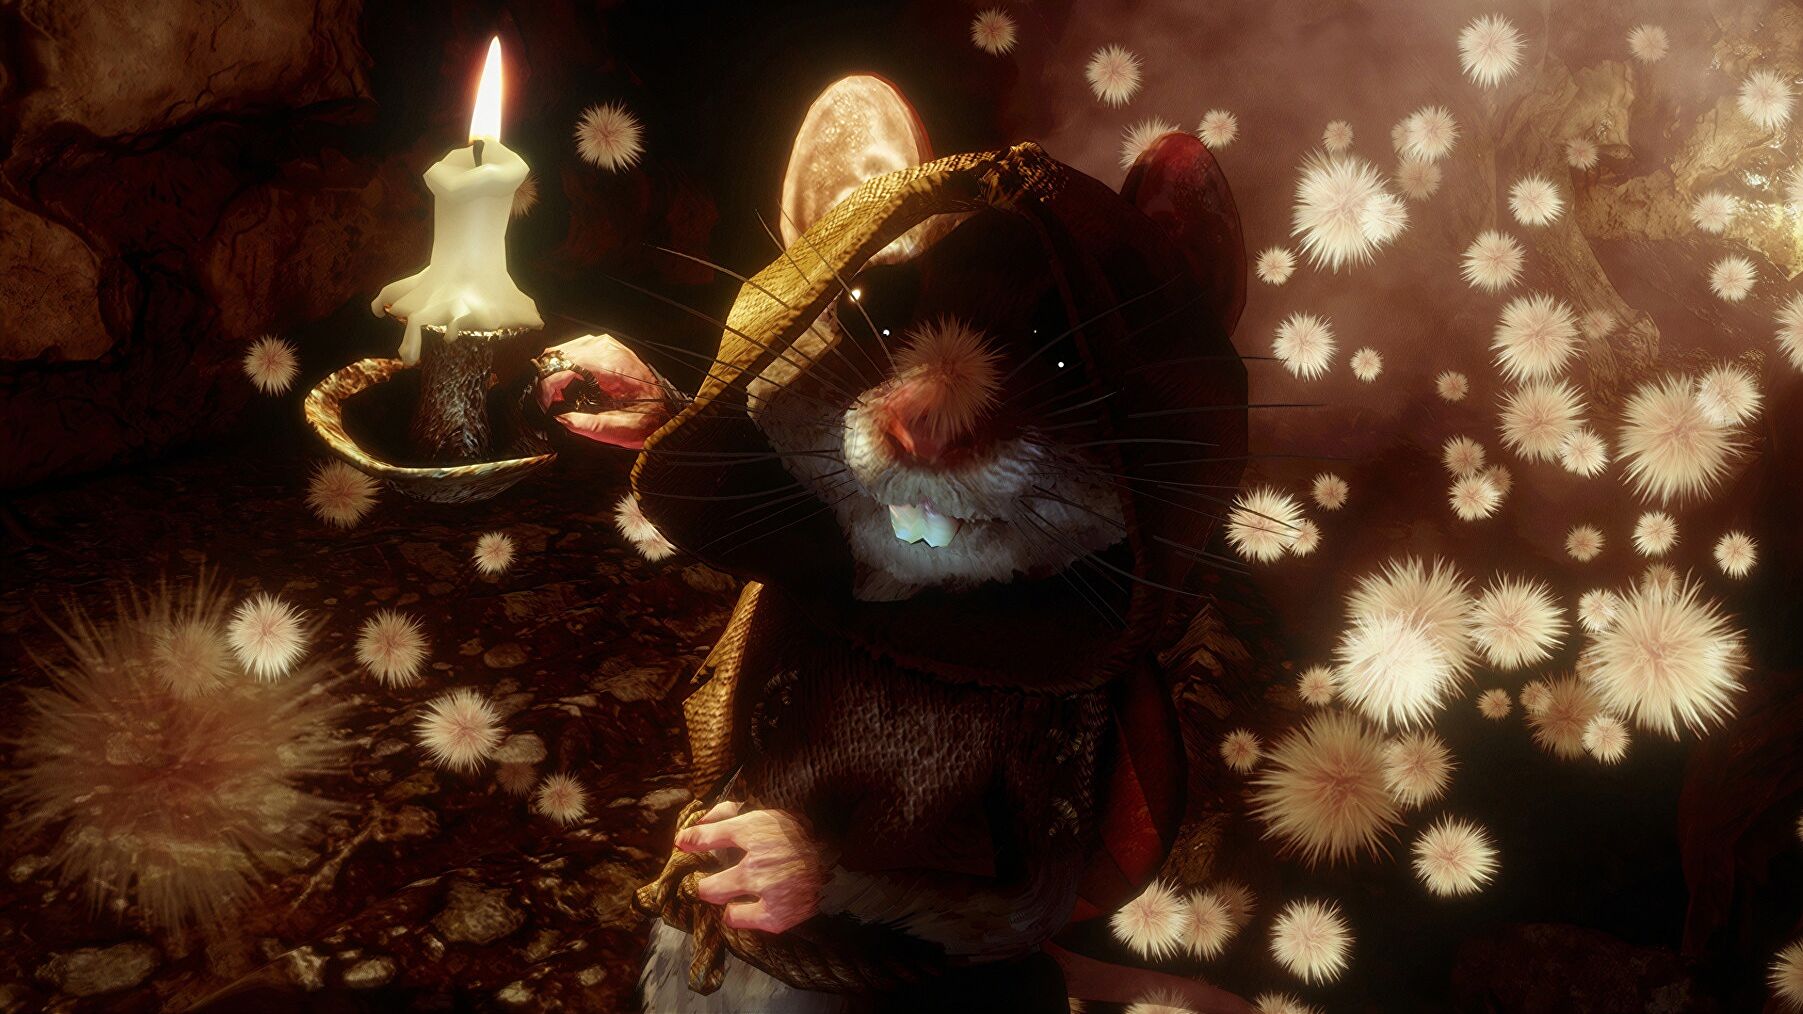 Medieval mouse RPG Ghost Of A Tale is free in GOG's Winter Sale